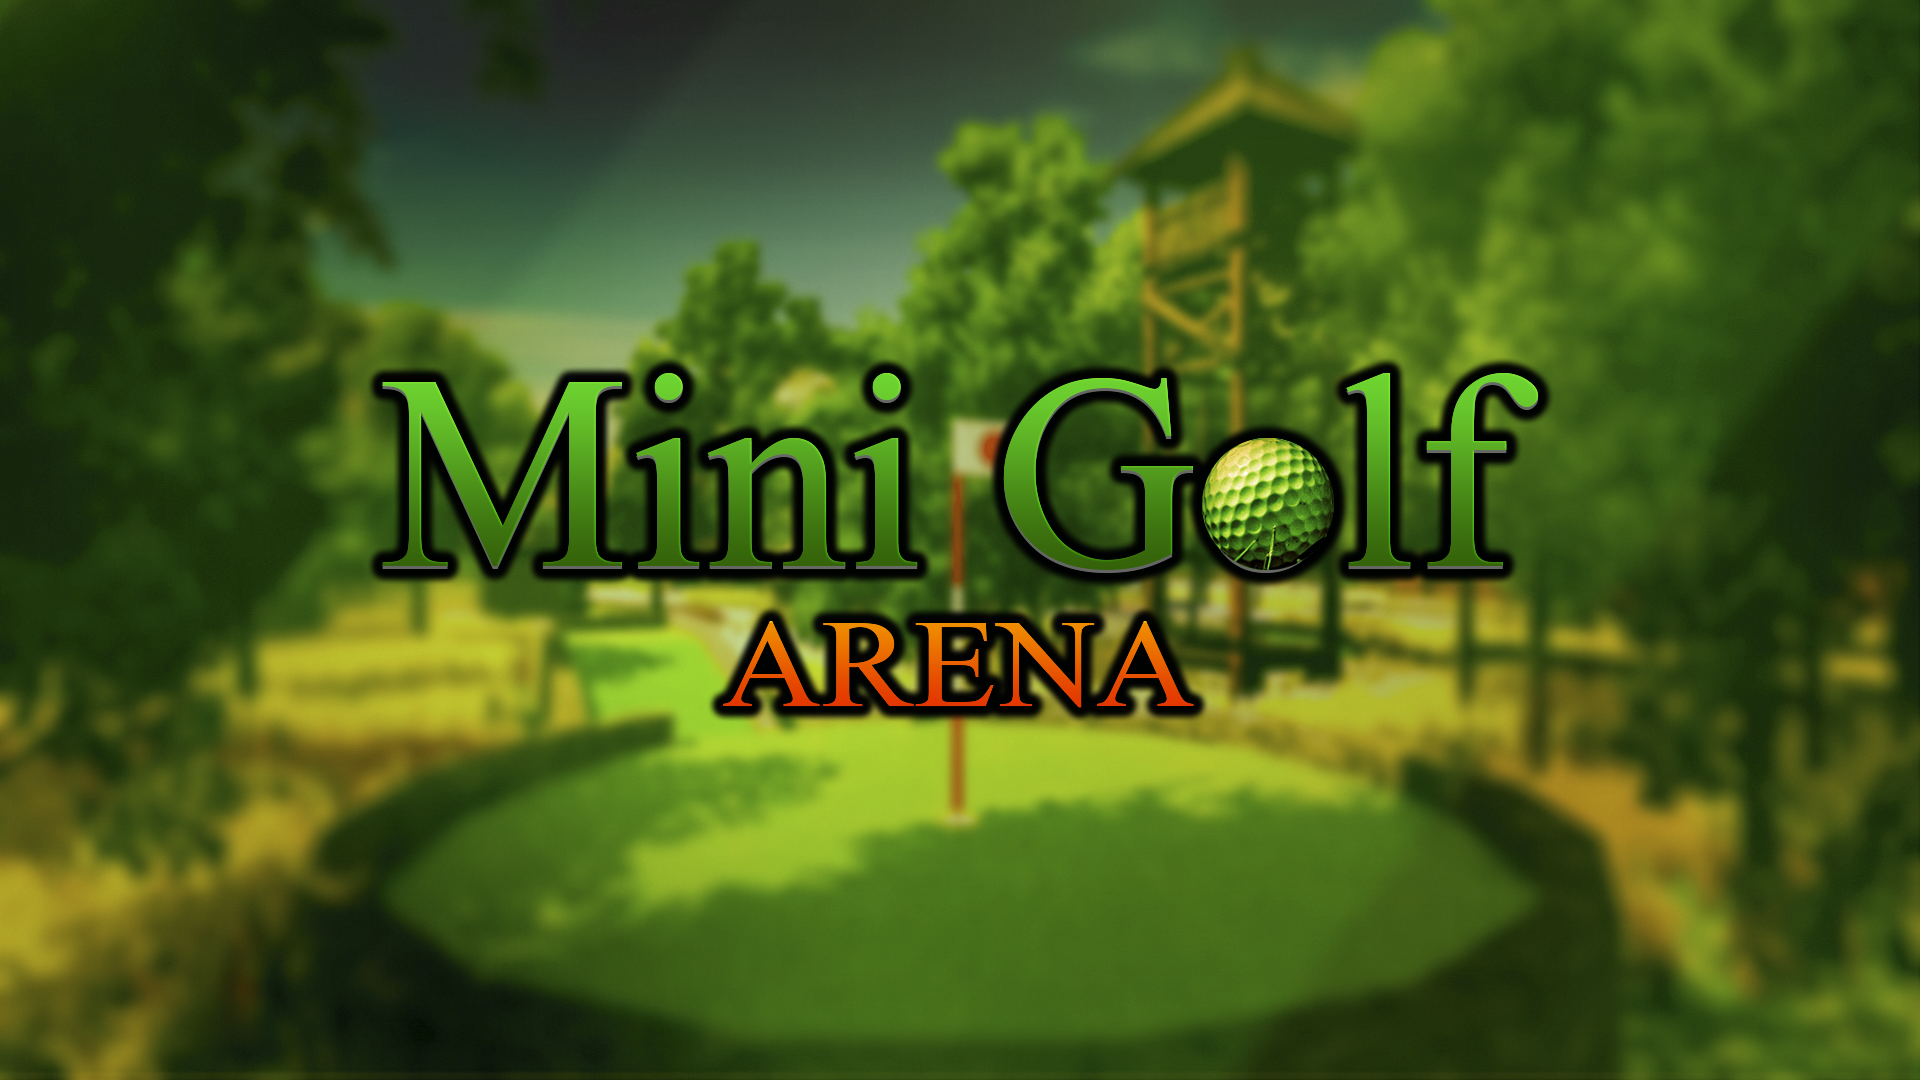 golf with your friends custom maps game pass